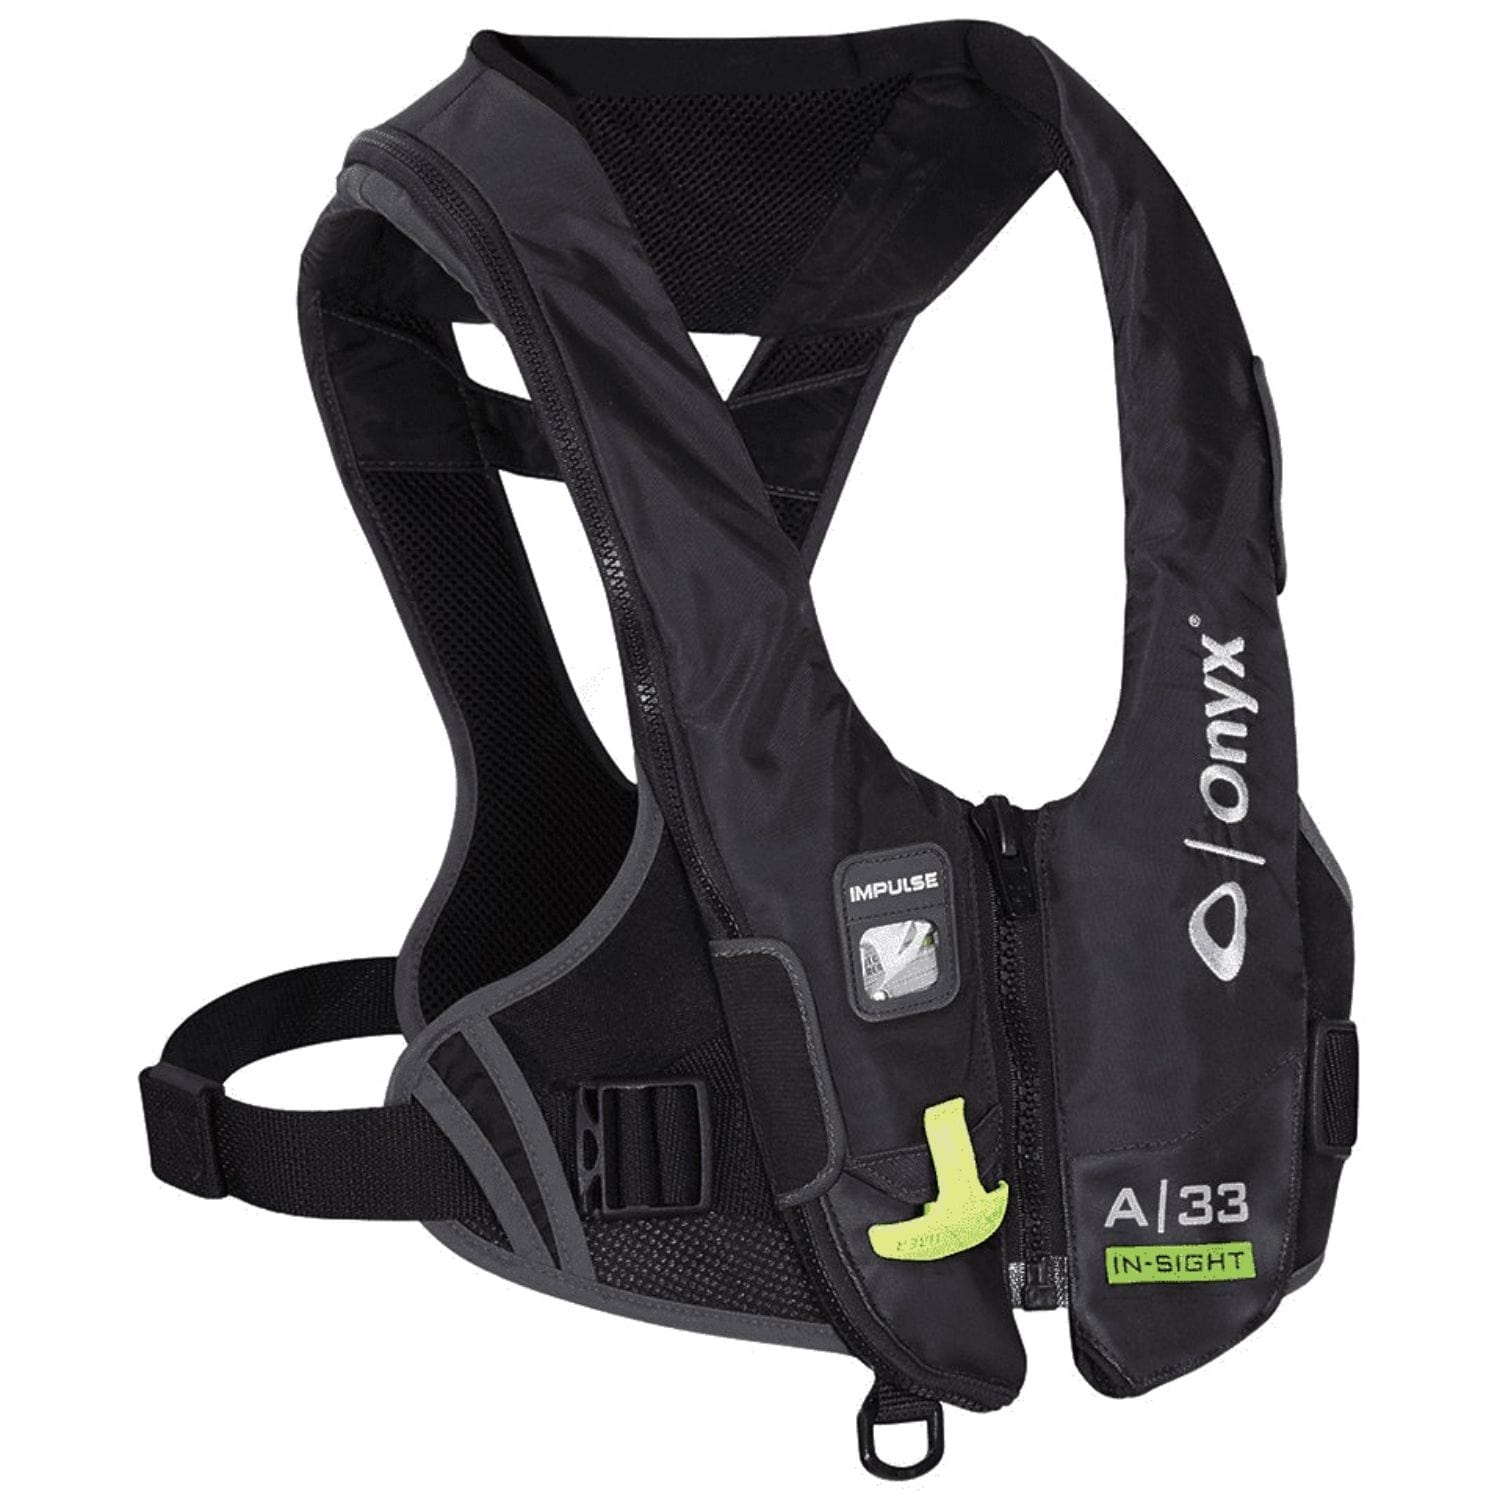 Onyx Marine/Water Sports : Lifevests Onyx Impulse A-33 IN-SIGHT Automatic Inflatable Life Jacket